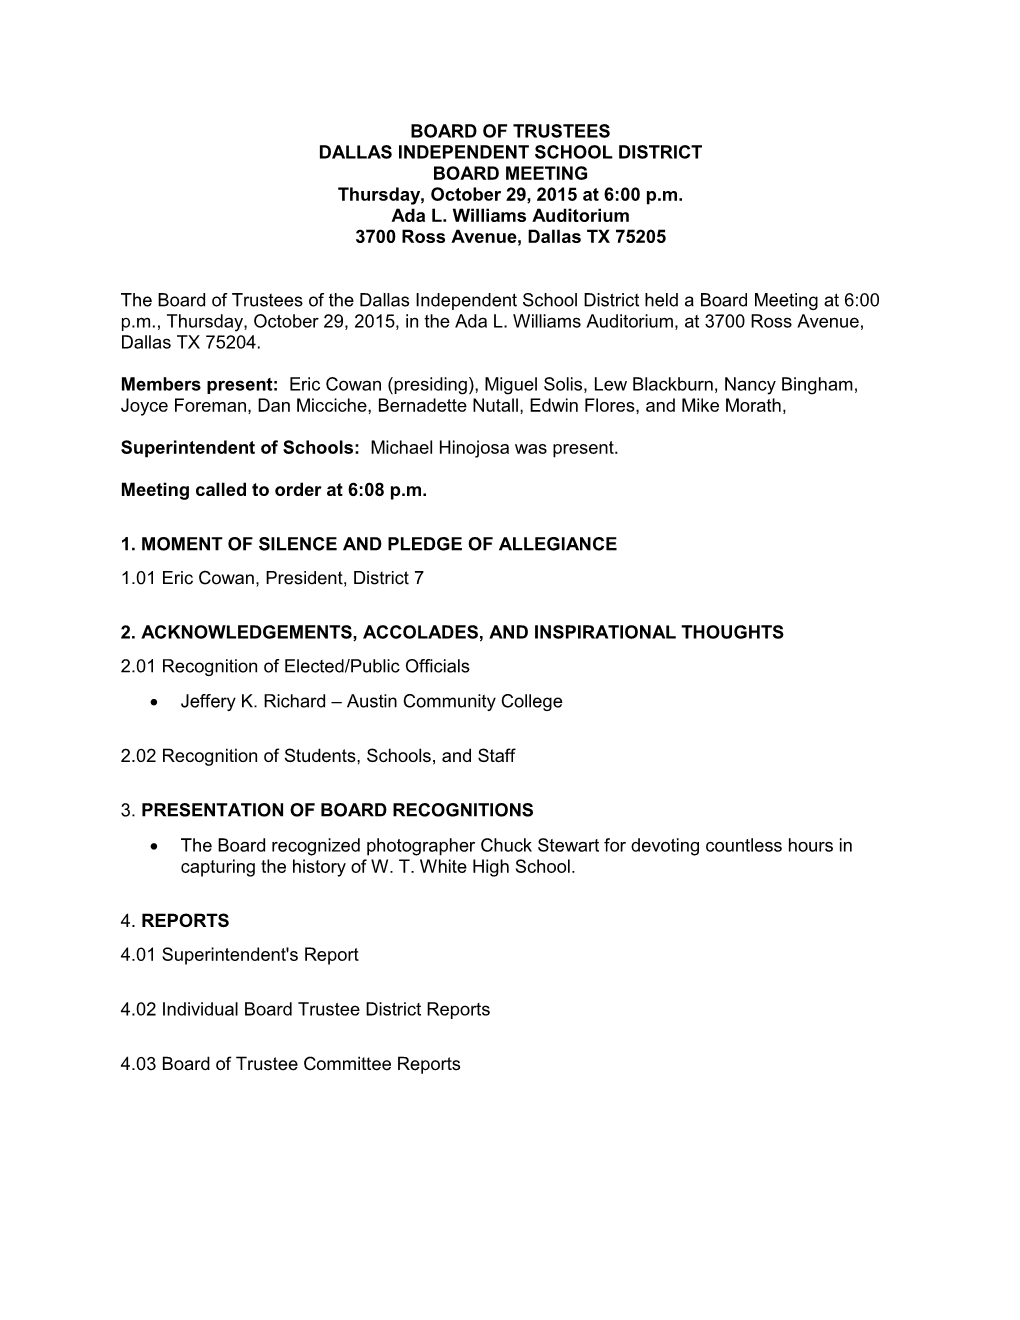 BOARD of TRUSTEES DALLAS INDEPENDENT SCHOOL DISTRICT BOARD MEETING Thursday, October 29, 2015 at 6:00 P.M. Ada L. Williams Audit